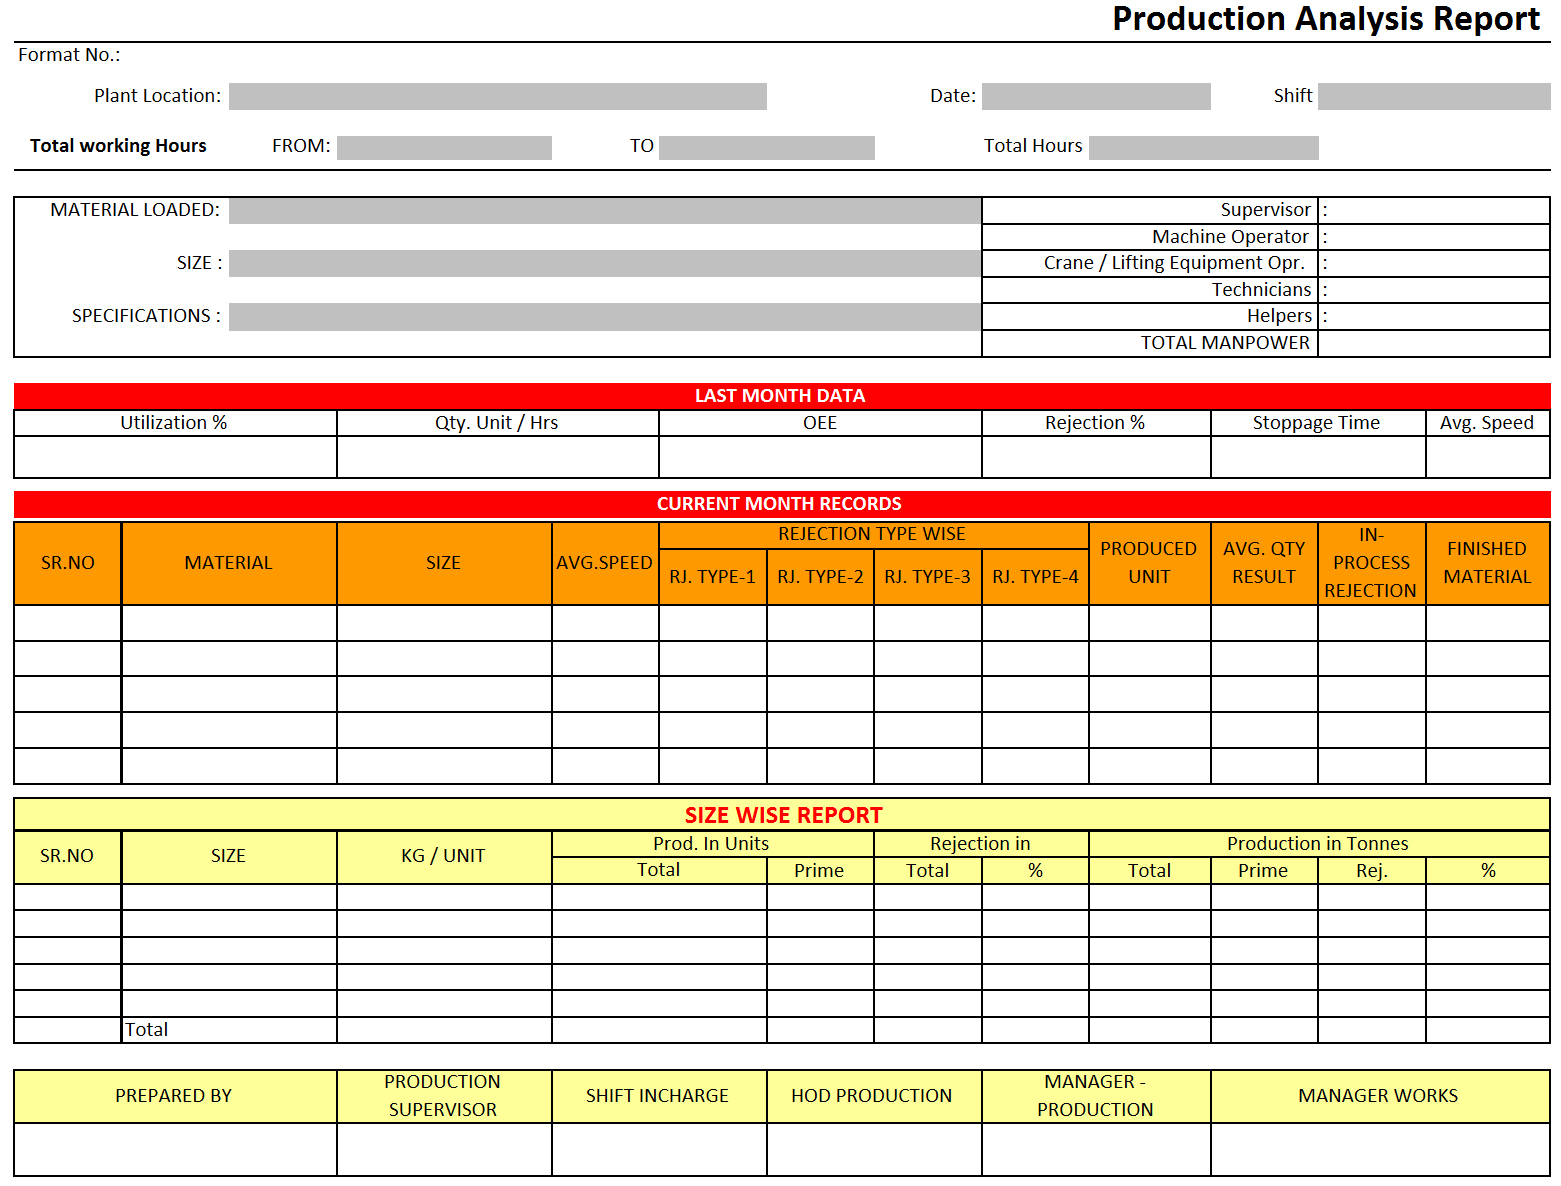 Production Analysis Report – In Company Analysis Report Template